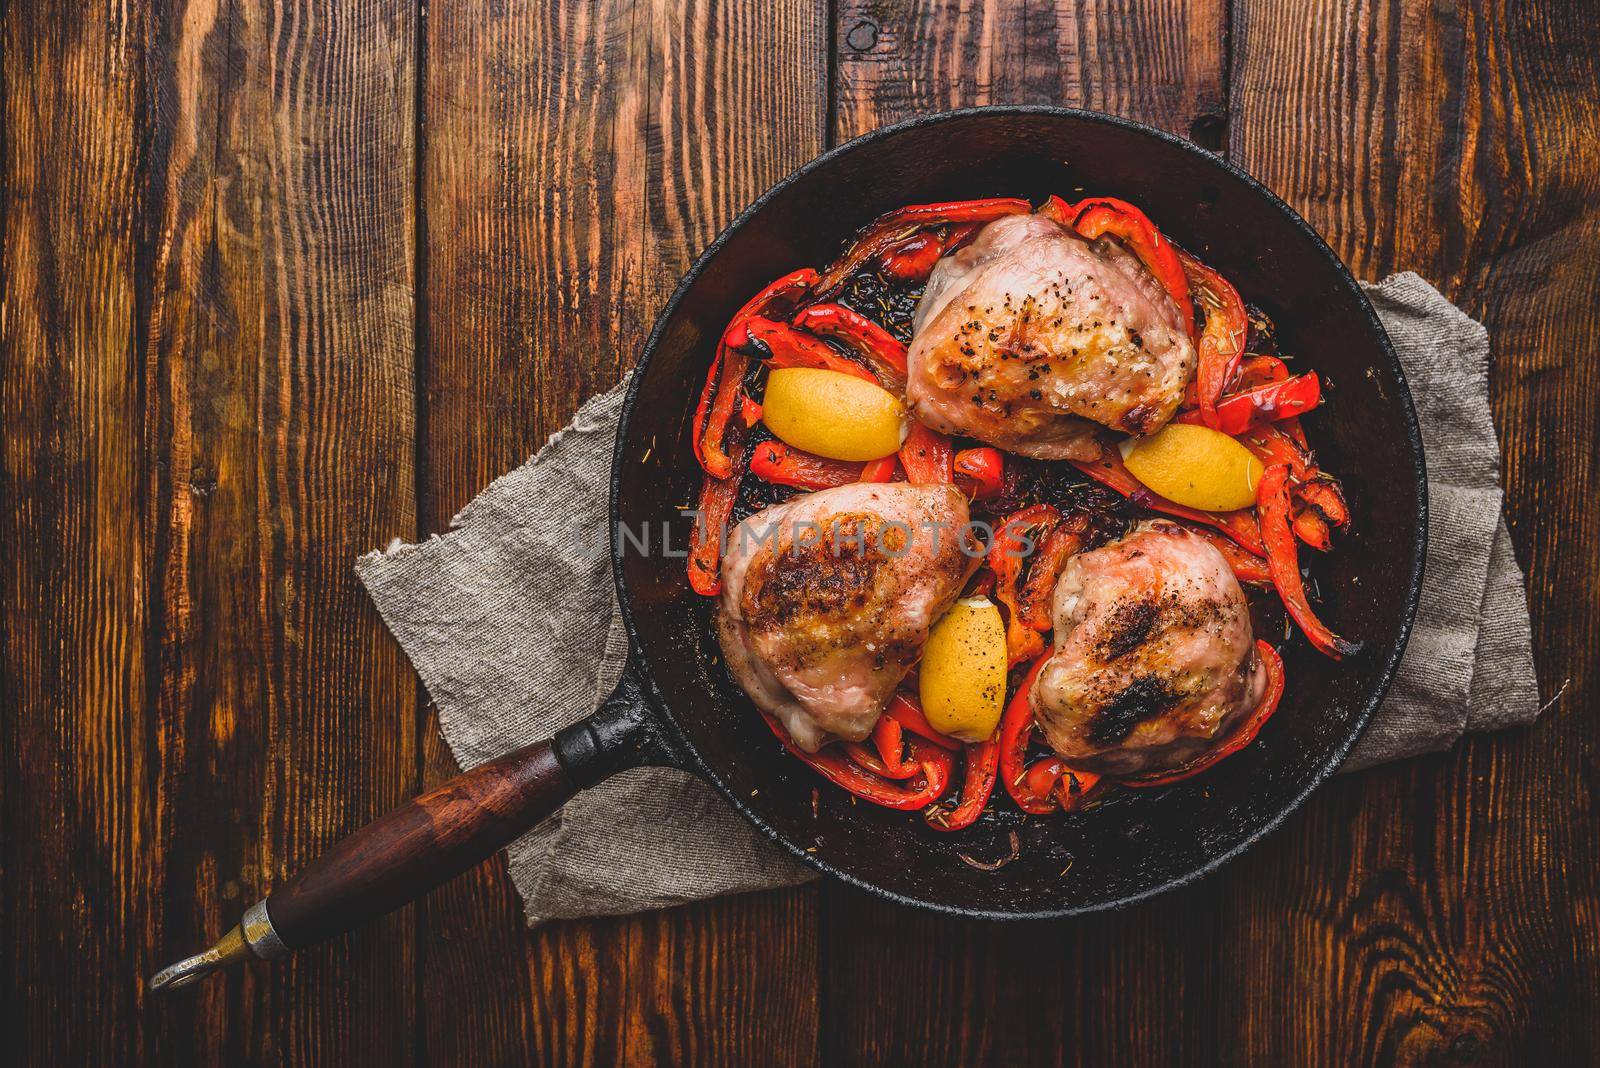 Chicken thighs baked with red bell peppers, rosemary and lemon in cast iron skillet. View from above